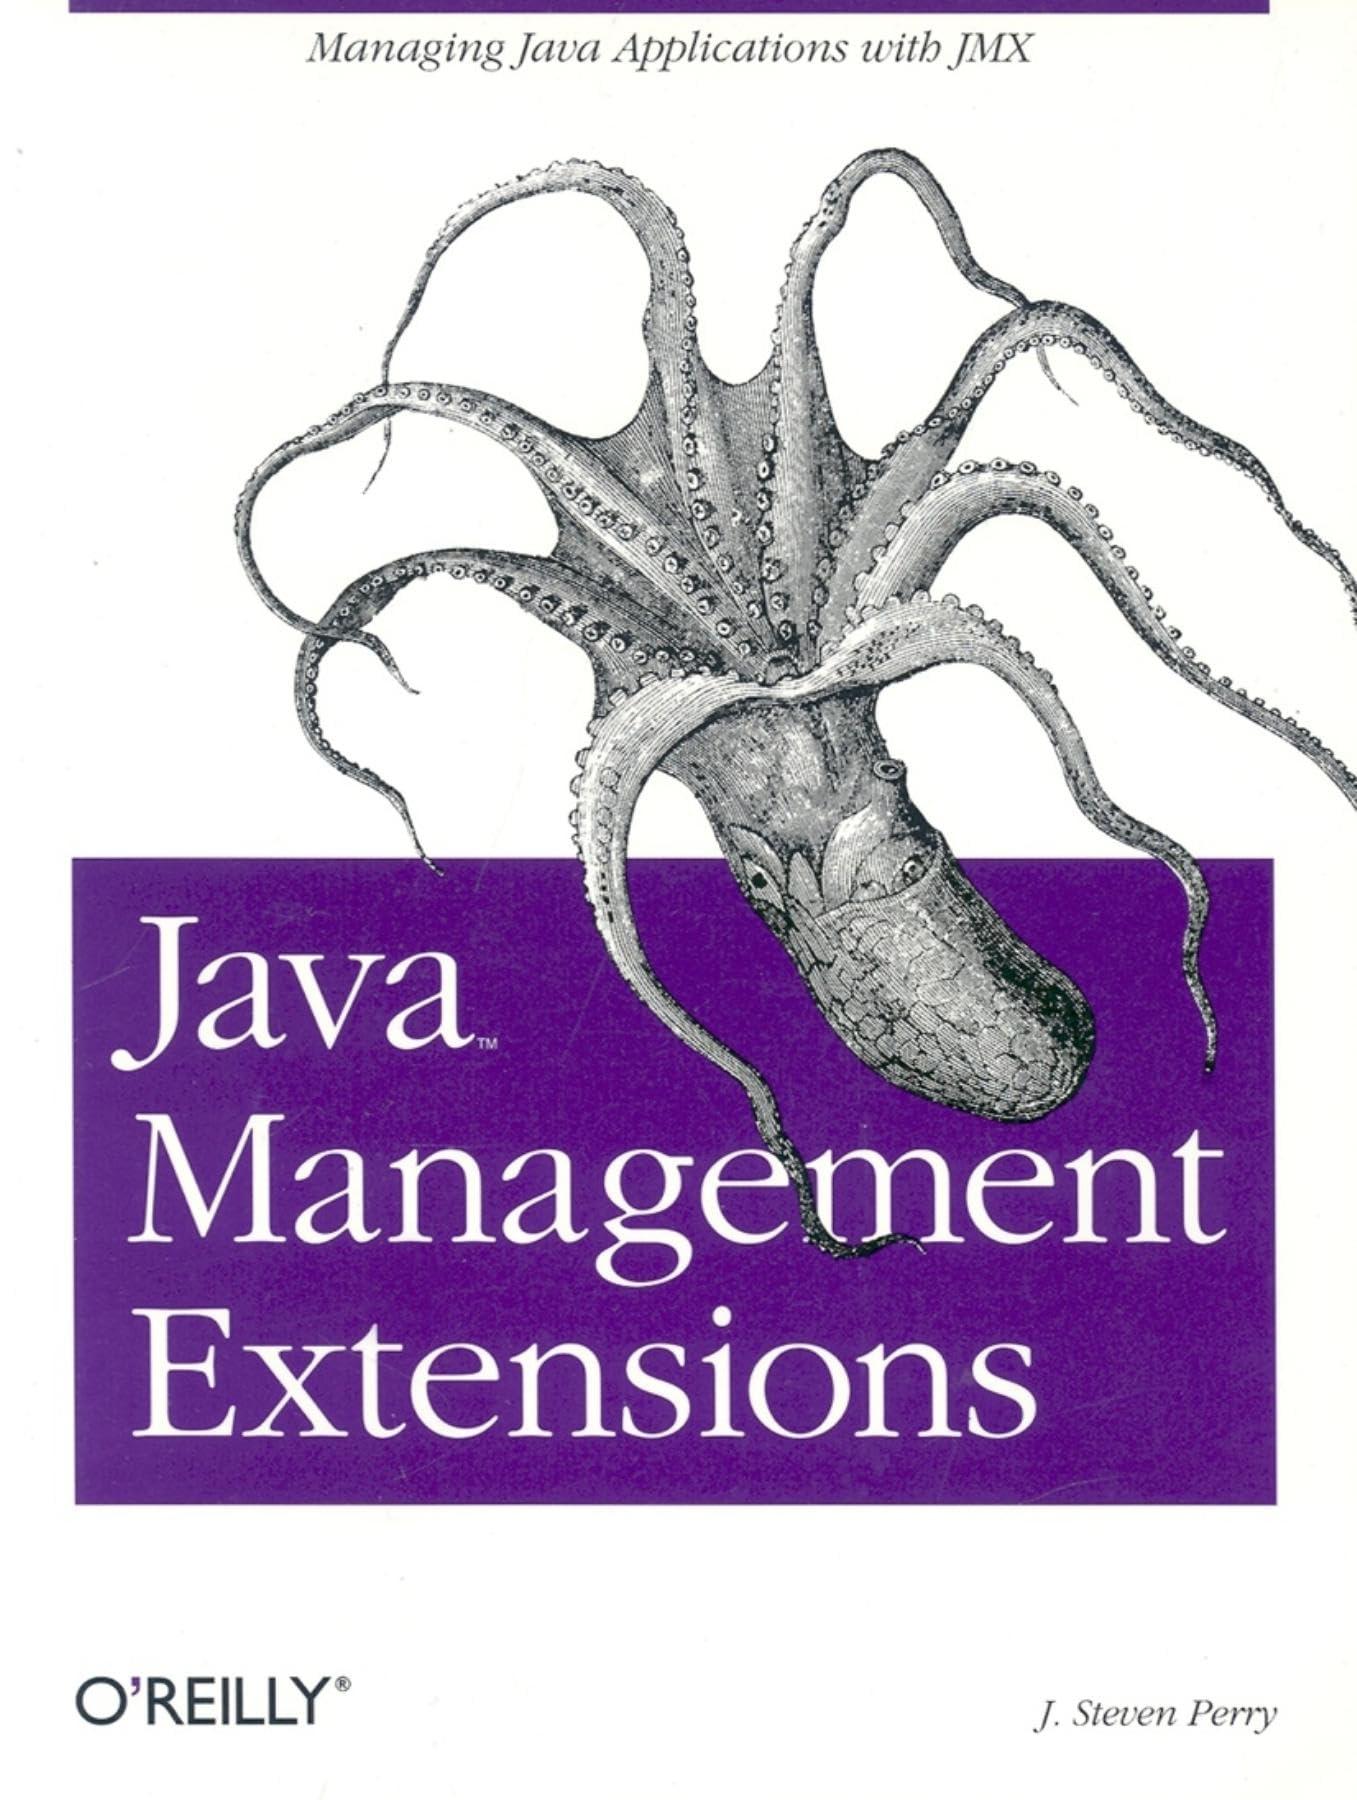 java management extension managing java applications with jmx 1st edition j. steven perry ? 0596002459,